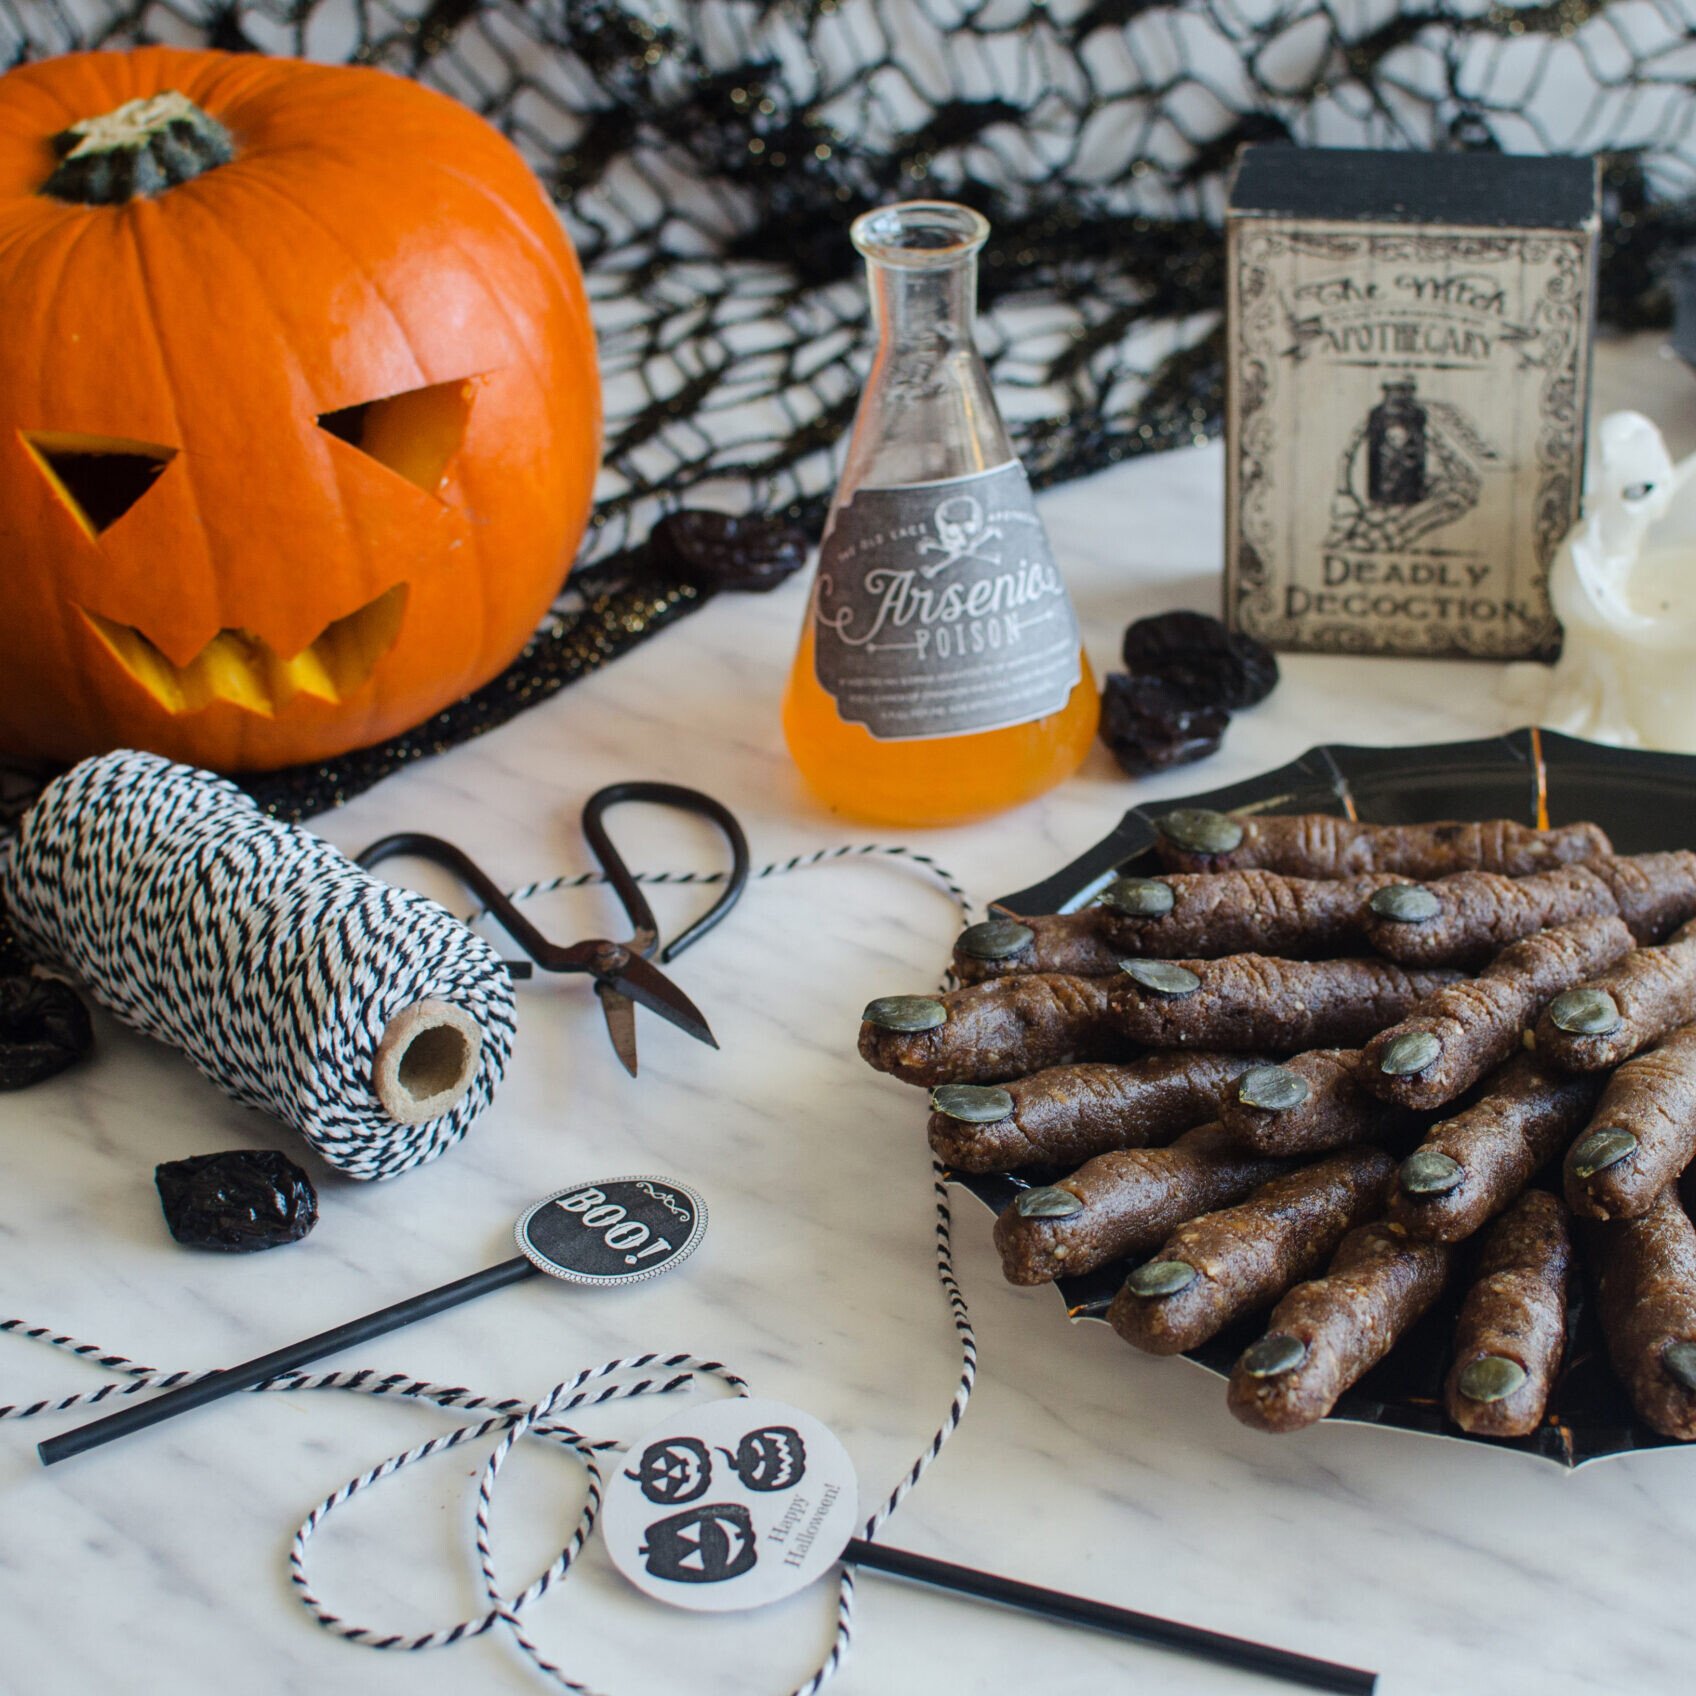 Healthy Halloween Treats: a black plate of Raw Witches Fingers